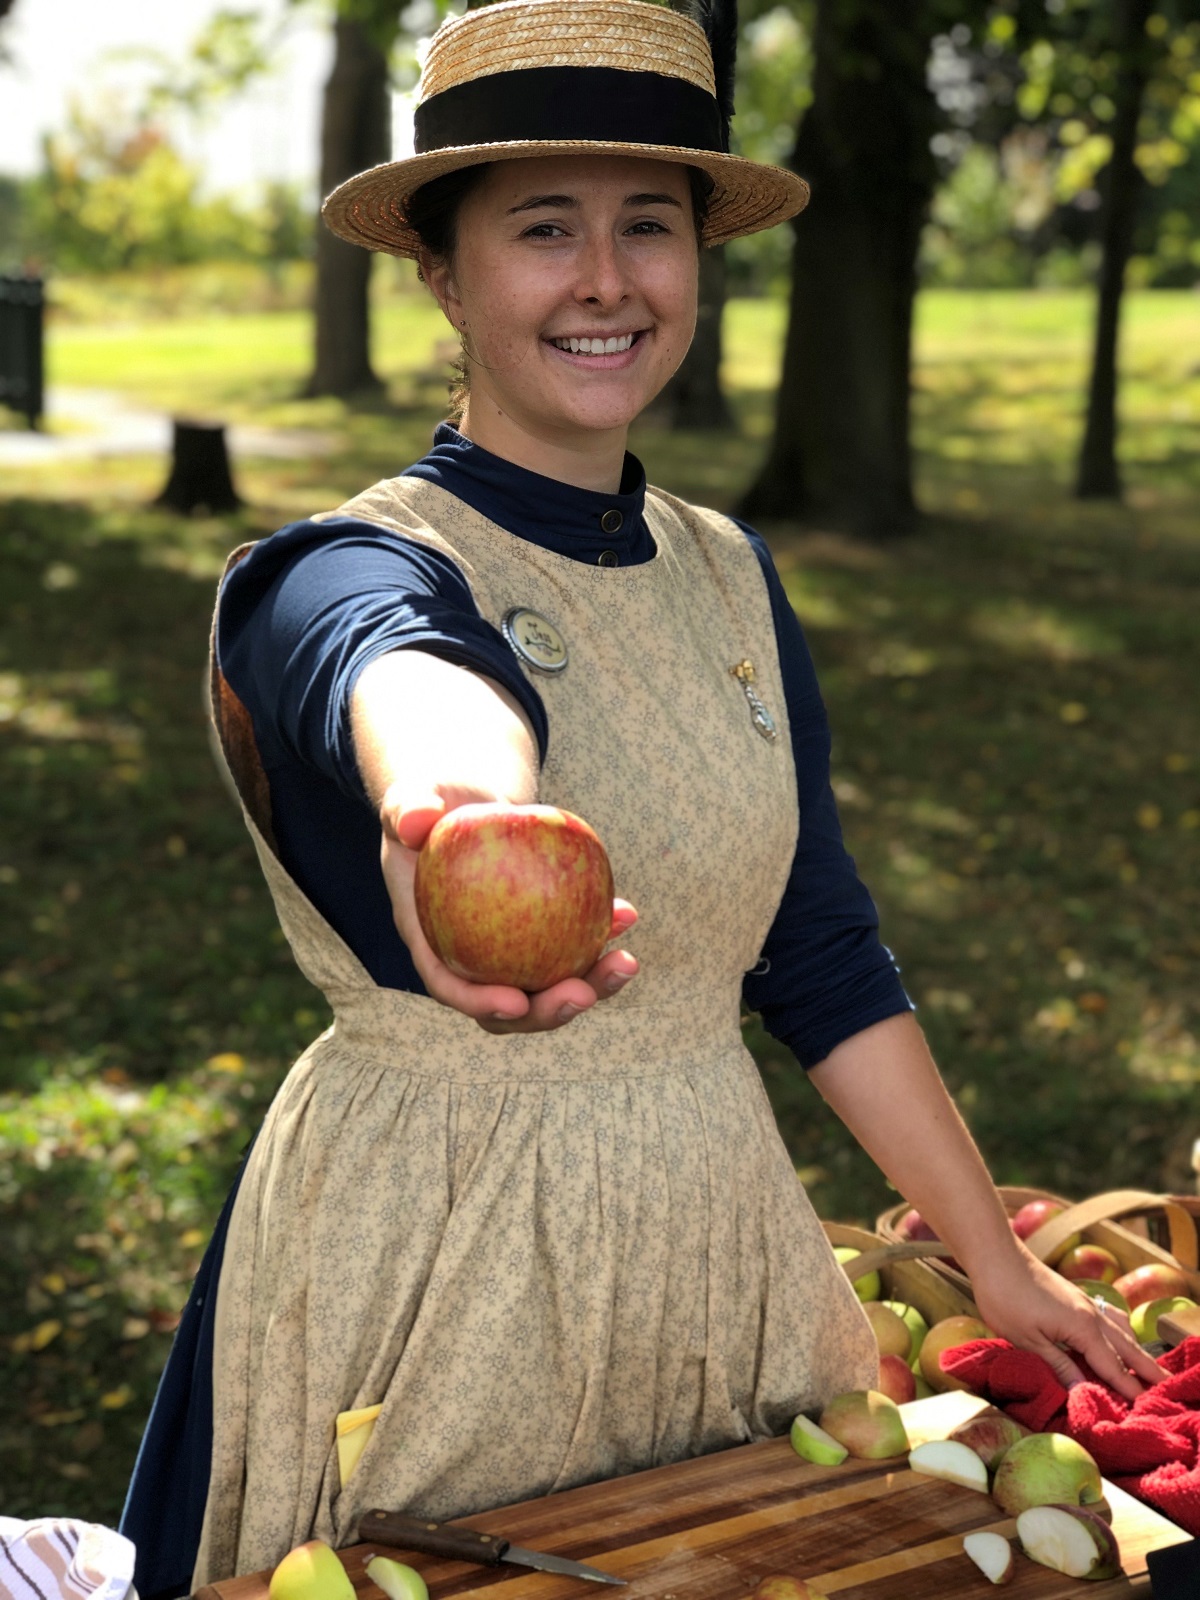 Jess in historial pioneer costume, holding apple